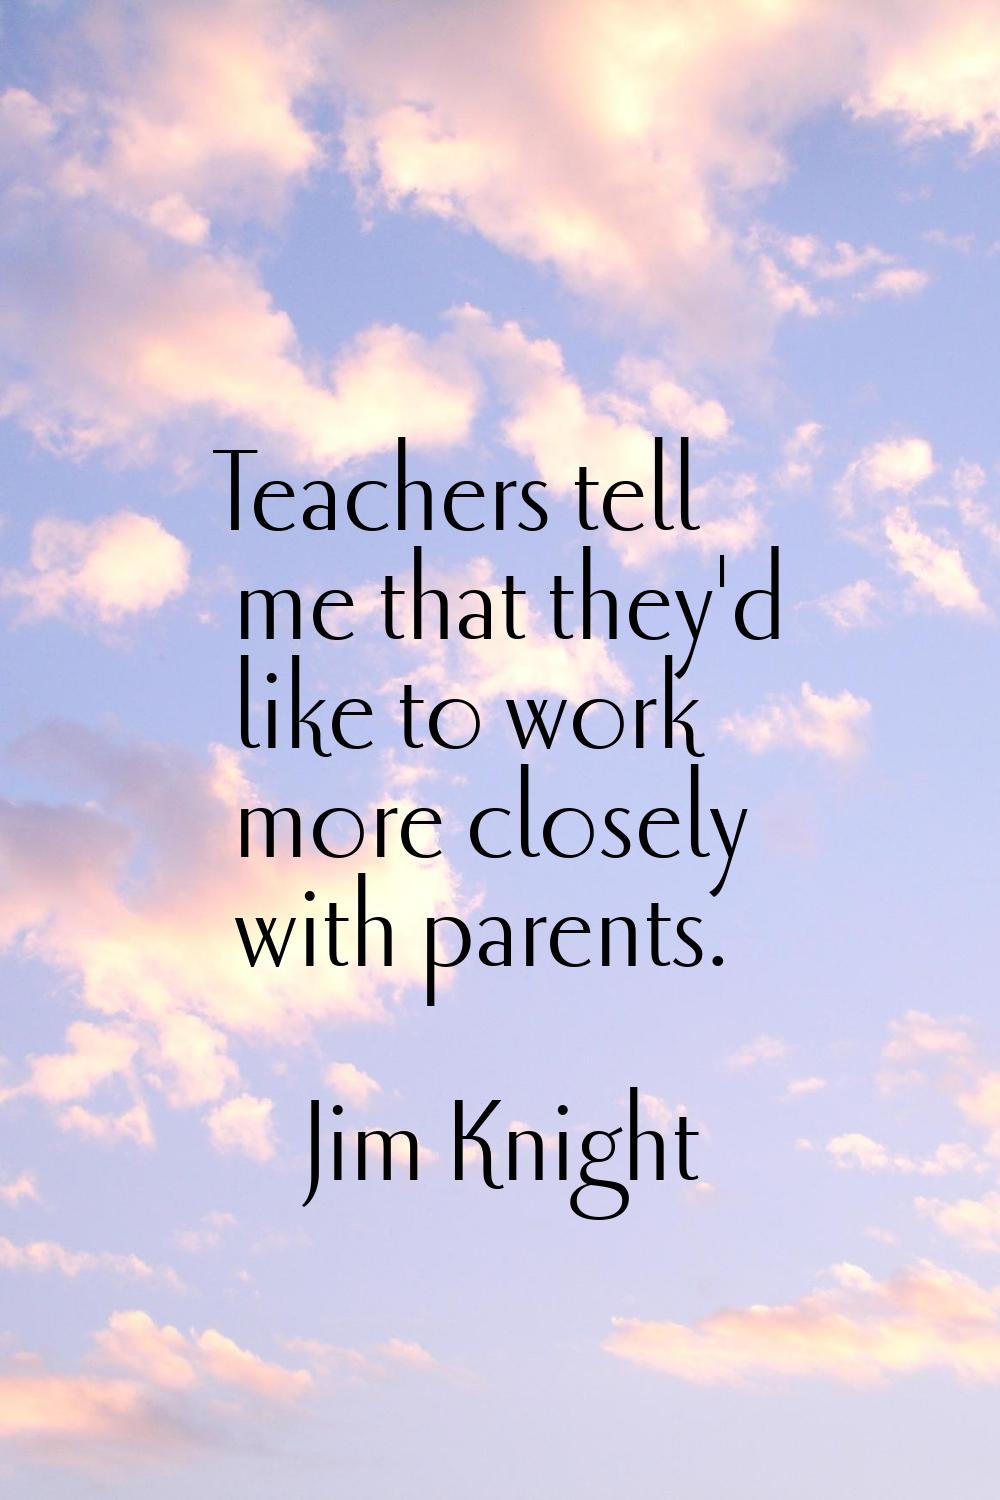 Teachers tell me that they'd like to work more closely with parents.